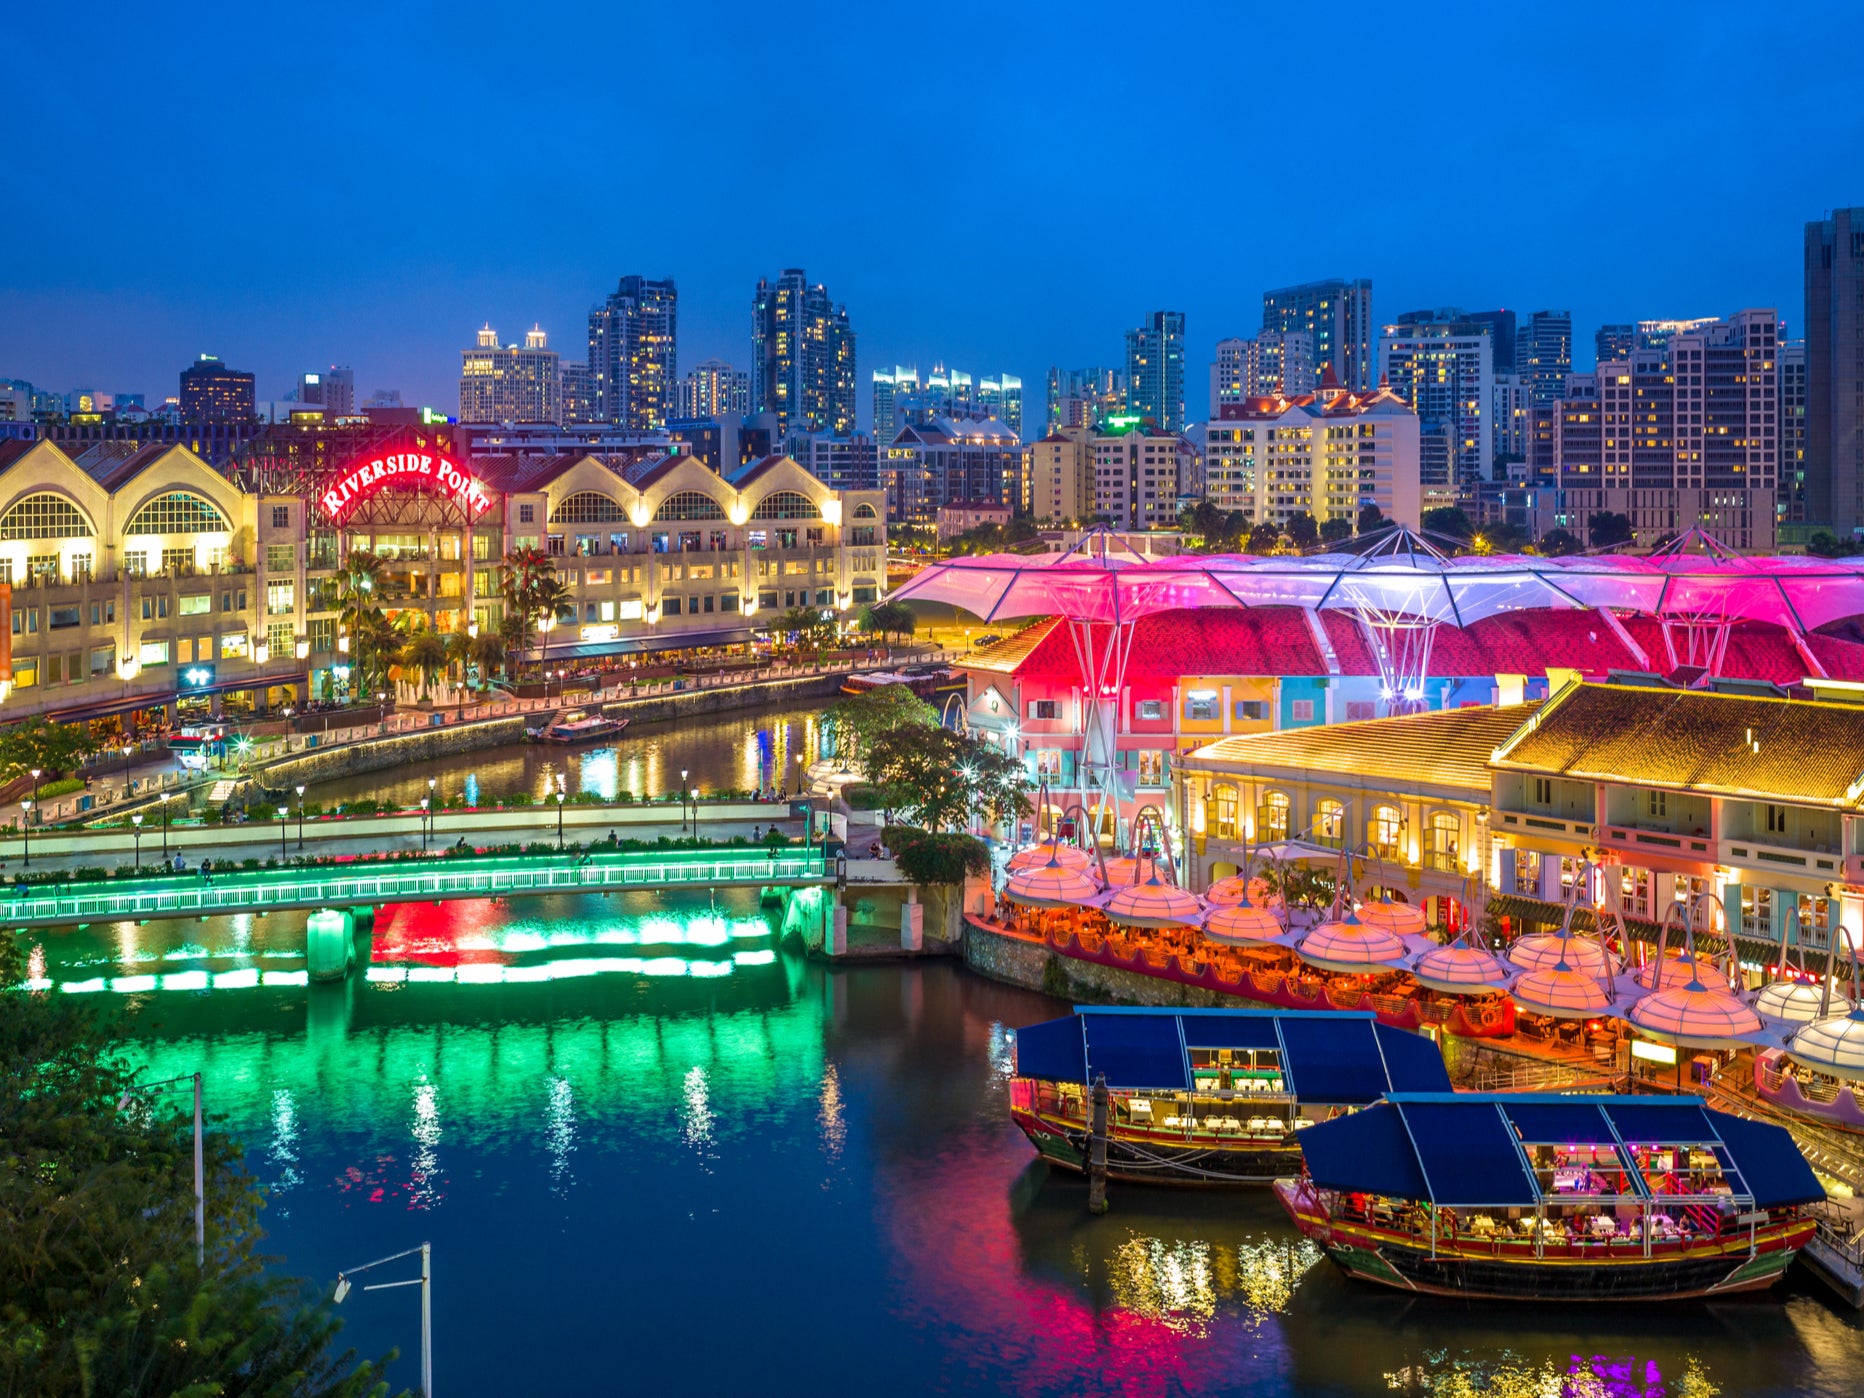 Enjoy a whirlwind four days in Singapore before heading to Thailand to relax on the beach